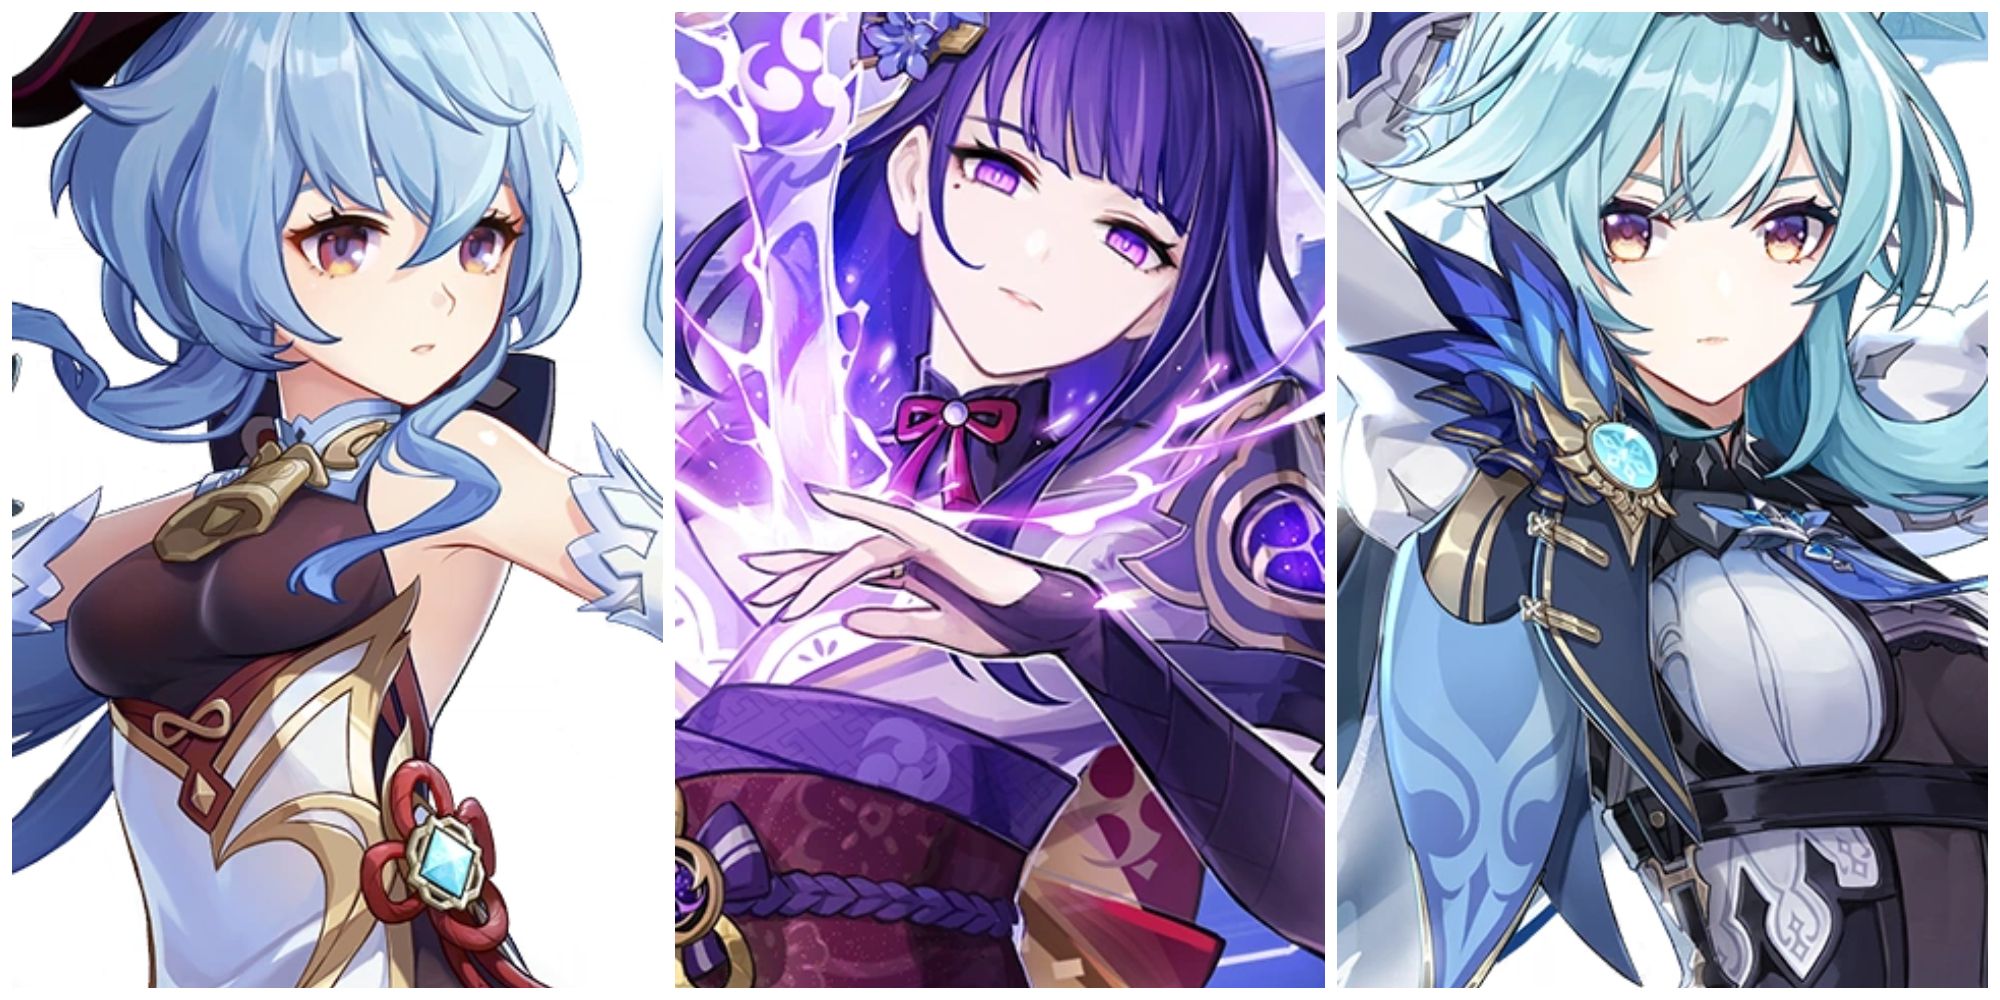 A split image of the characters Ganyu, Raiden Shogun, and Yula on the wish banners for Genshin Impact.